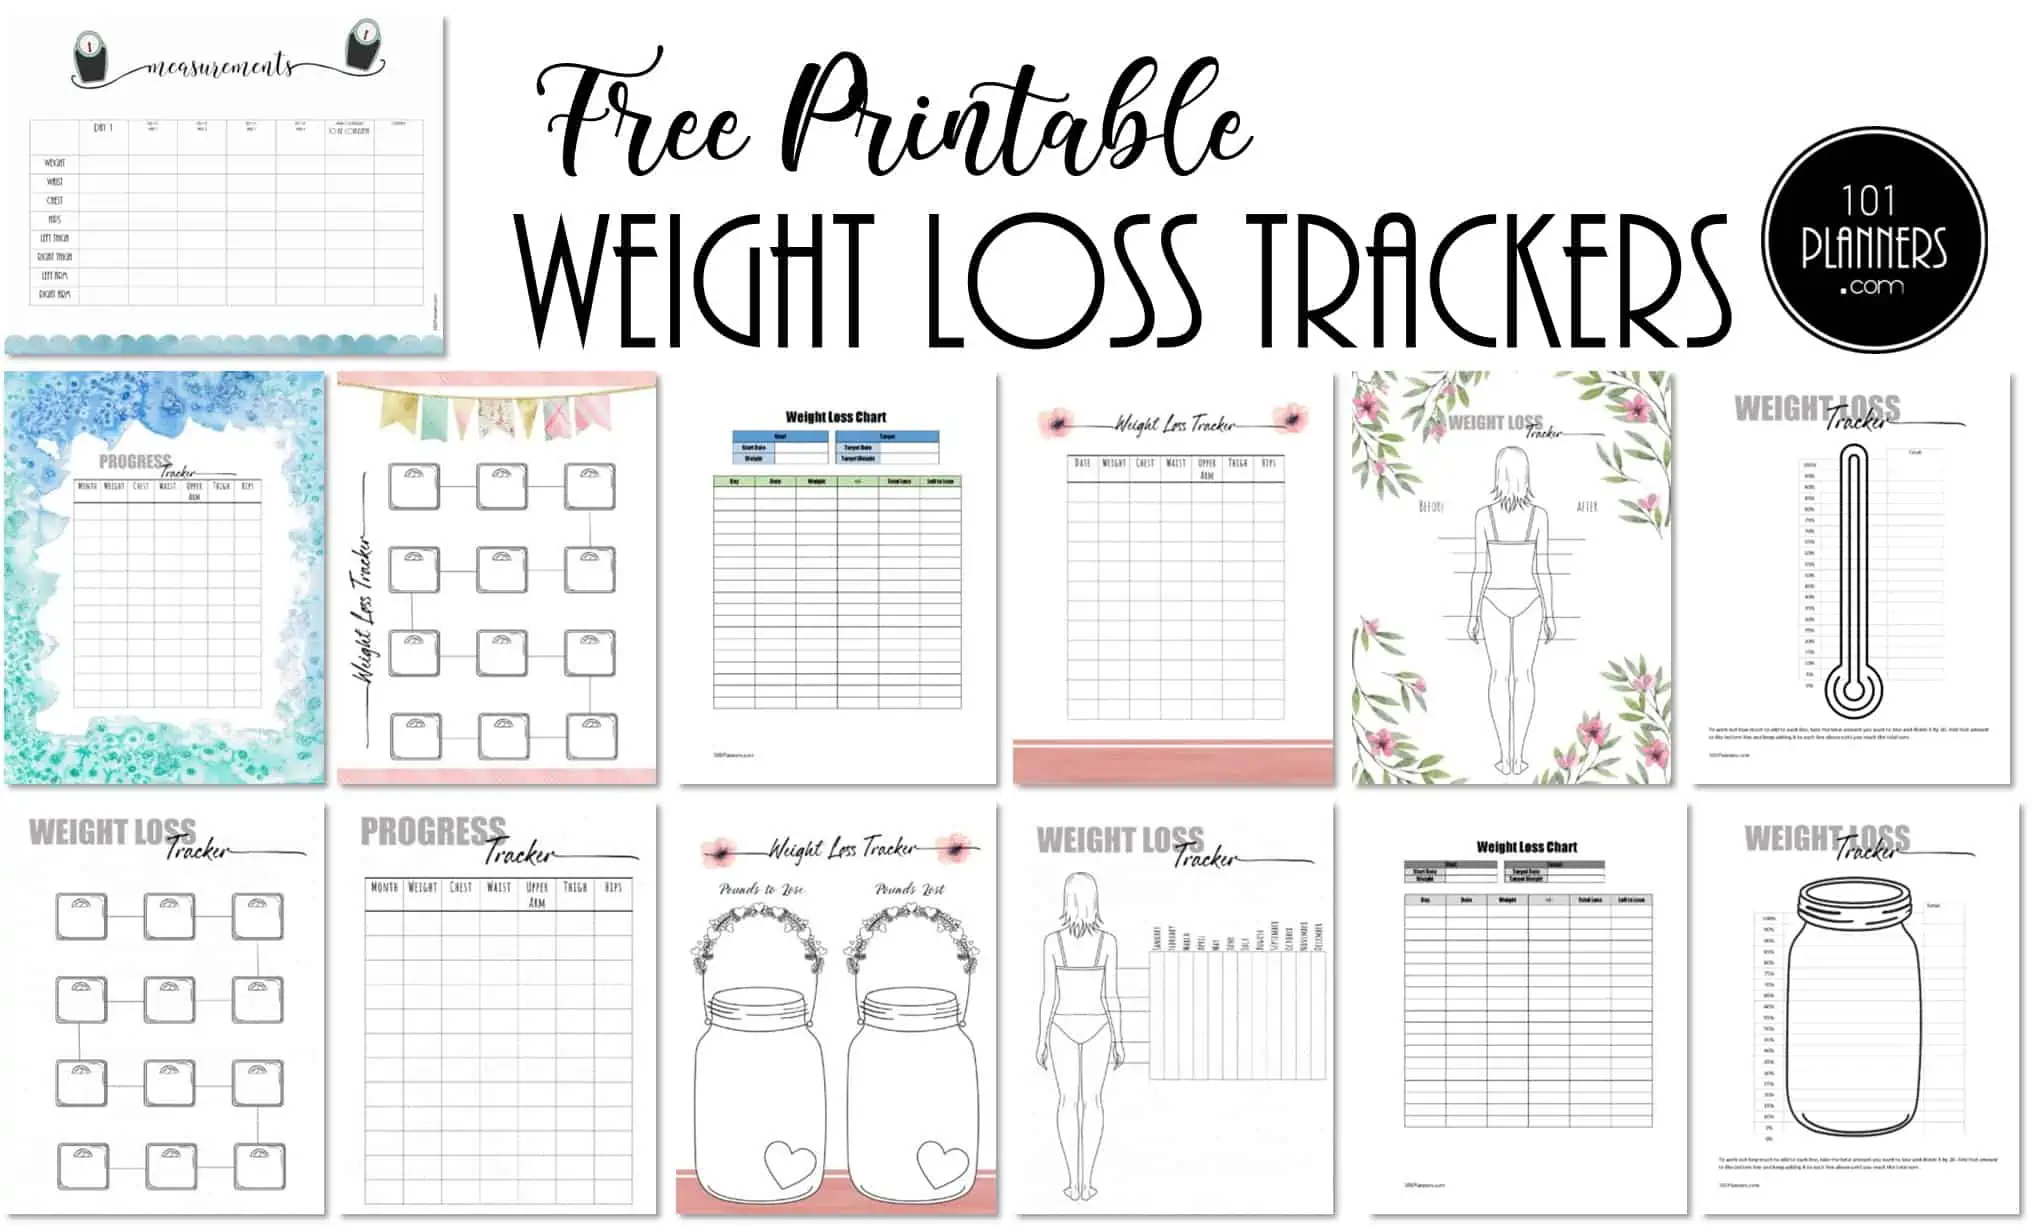 FREE Weight Loss Tracker Printable